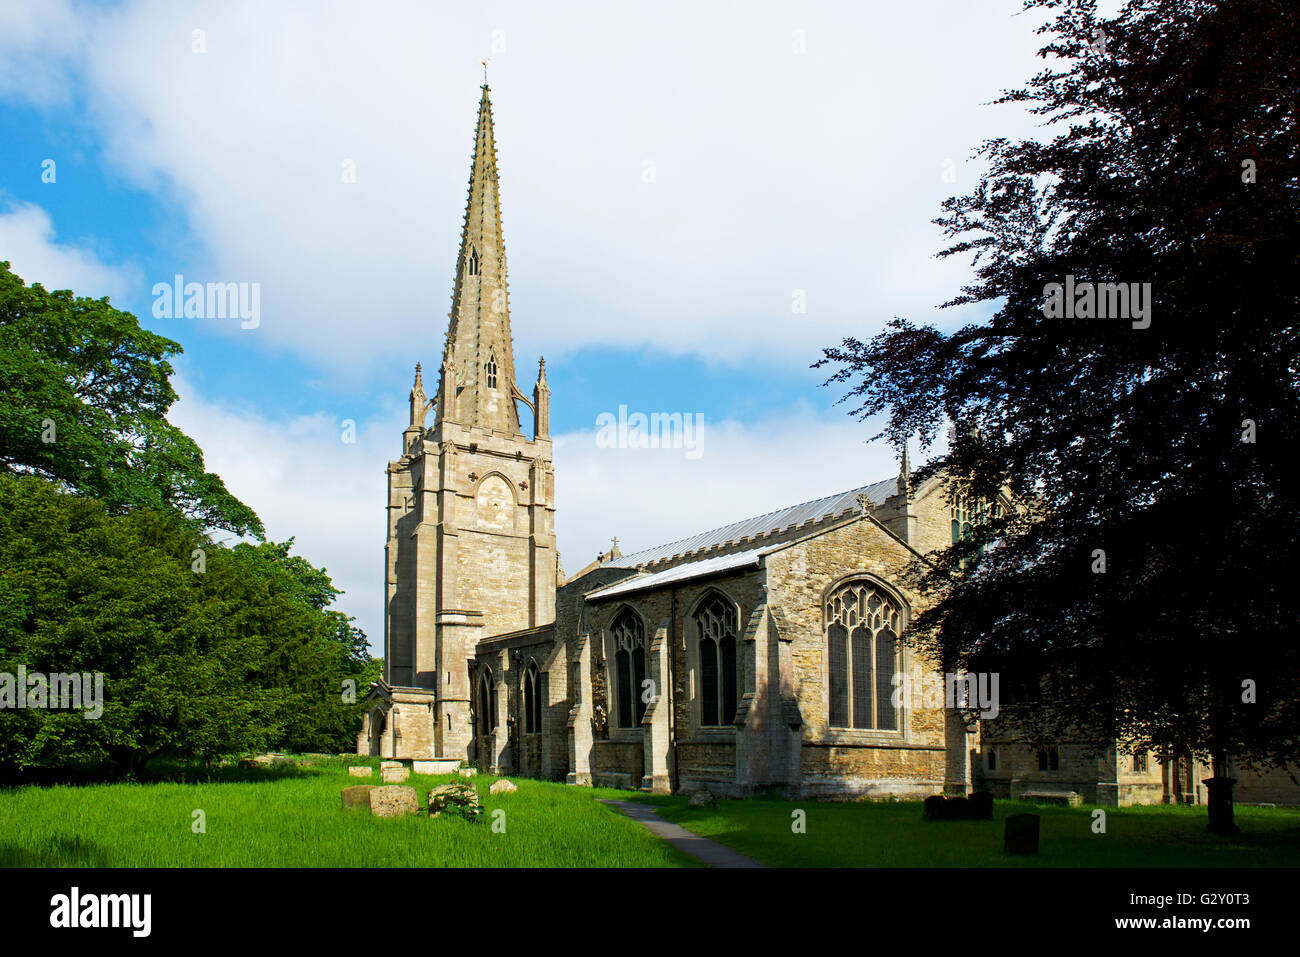 Parish church Spalding, Lincolnshire, dedicated to St Mary and St Nicholas, England UK Stock Photo